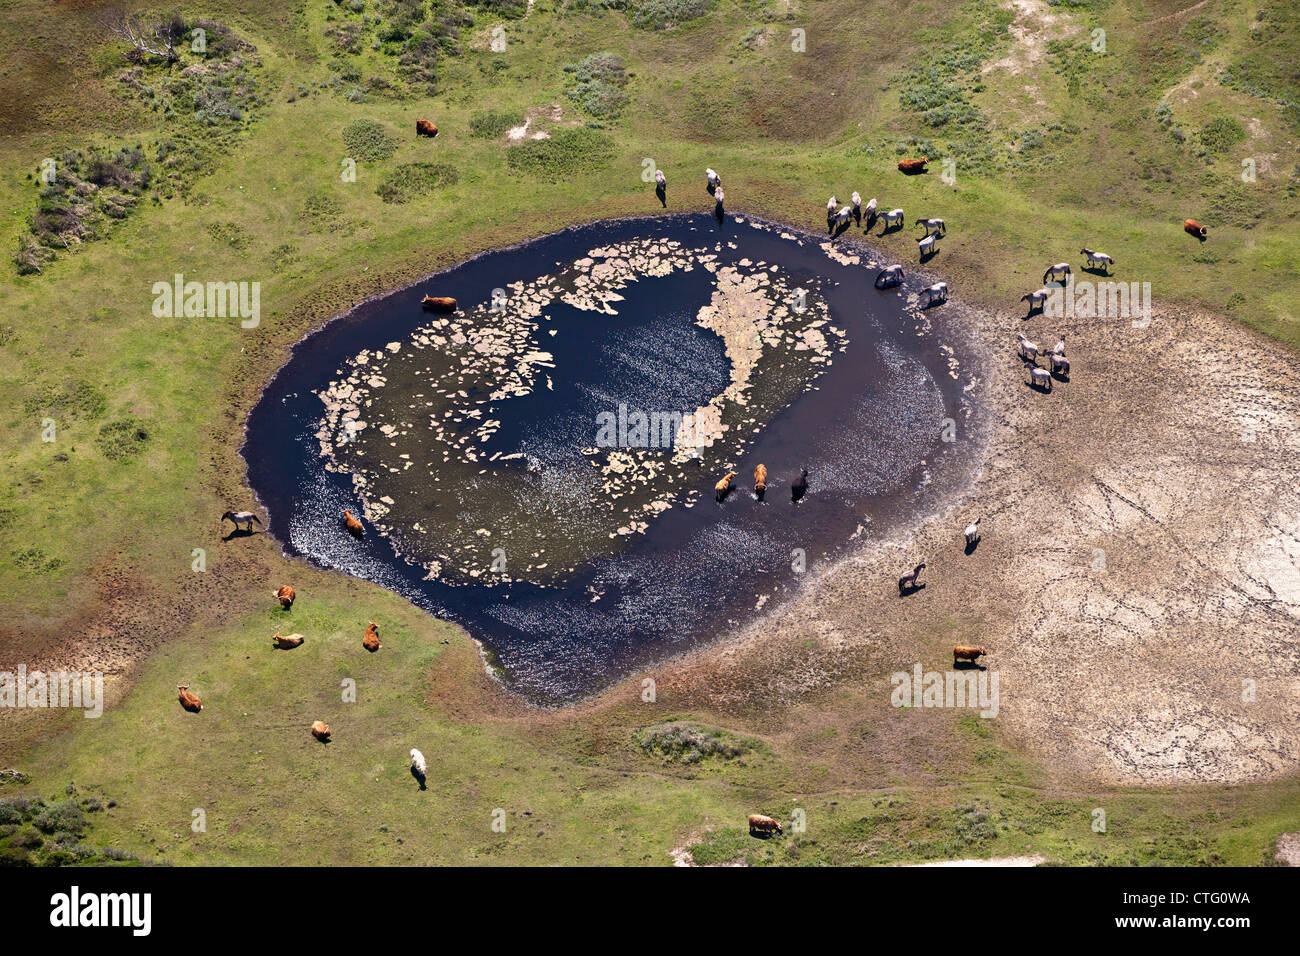 The Netherlands, IJmuiden, Aerial, National park Zuid-Kennemerland. Konik ponies and Heck cattle at pond. Stock Photo